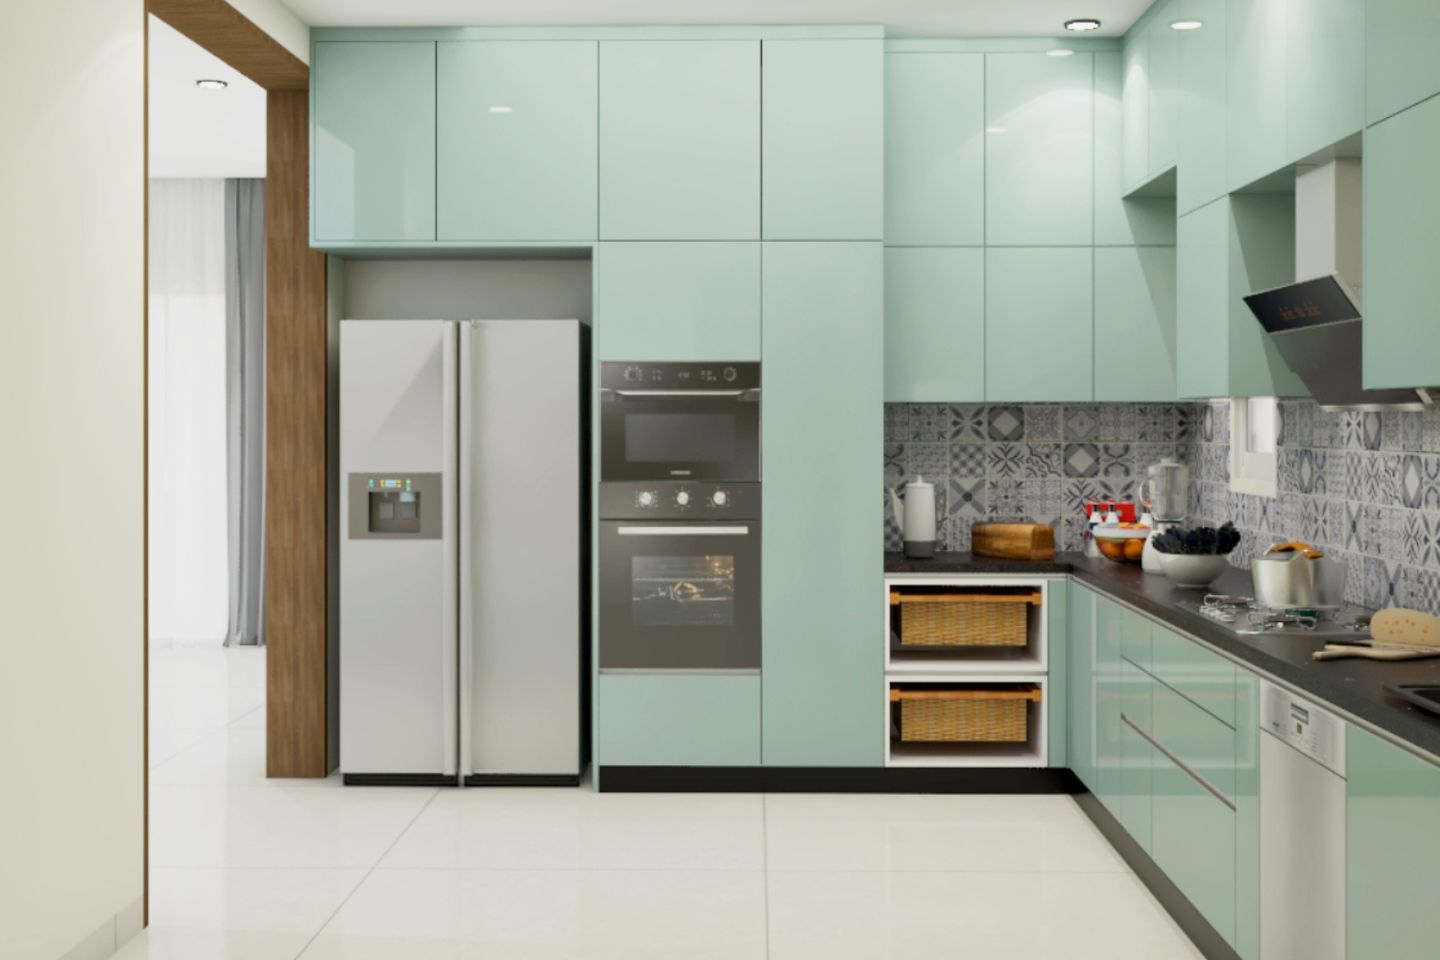 L-Shape Aqua Green Kitchen With Wicker Basket And Tall Appliance Unit - Livspace